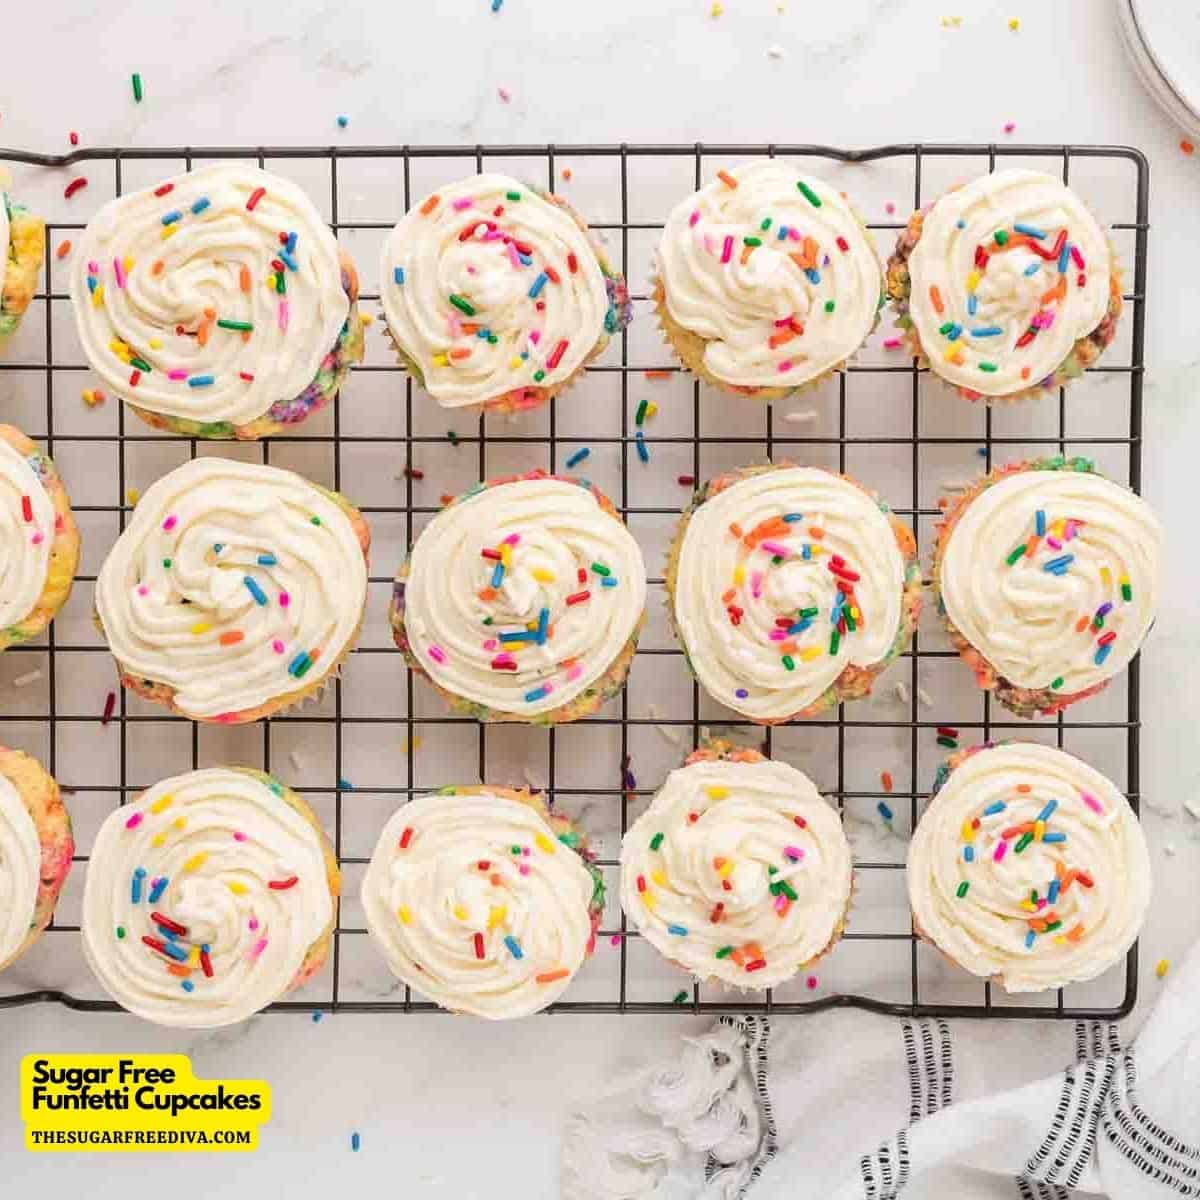 Sugar Free Funfetti Cupcakes, an easy and delicious moist and colorful dessert or snack recipe made with no added sugar. Includes frosting.